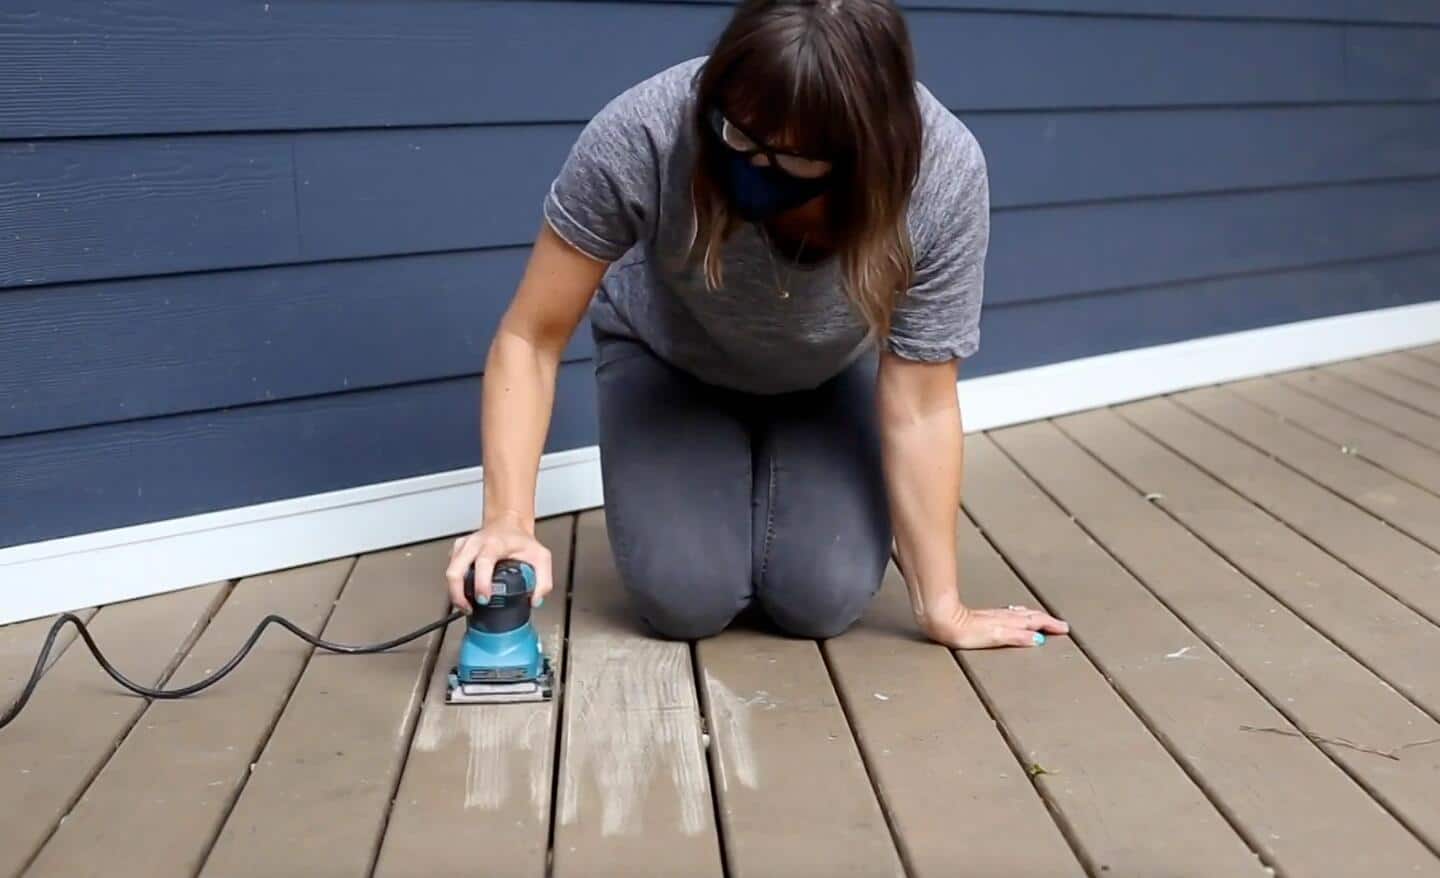 A woman uses a corded quarter-sheet sander to sand the surface of a deck during a refinishing project.